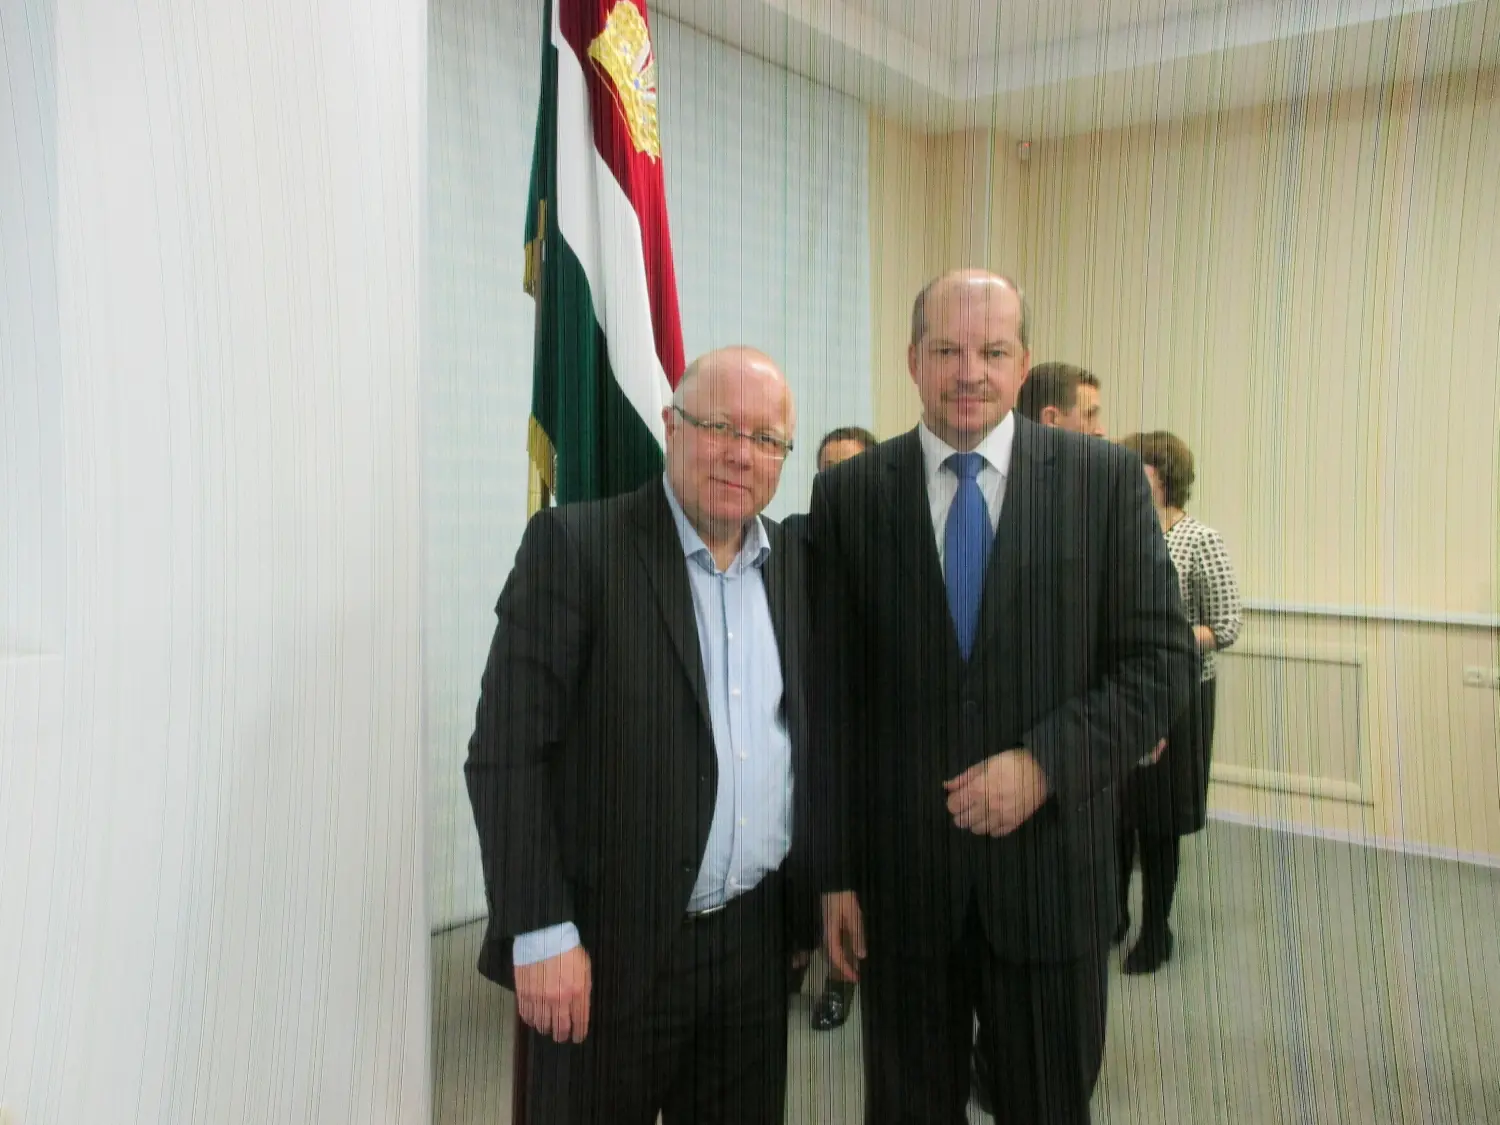 Dr. Detlev Freyhoff with minister of education Uljanowsk RU